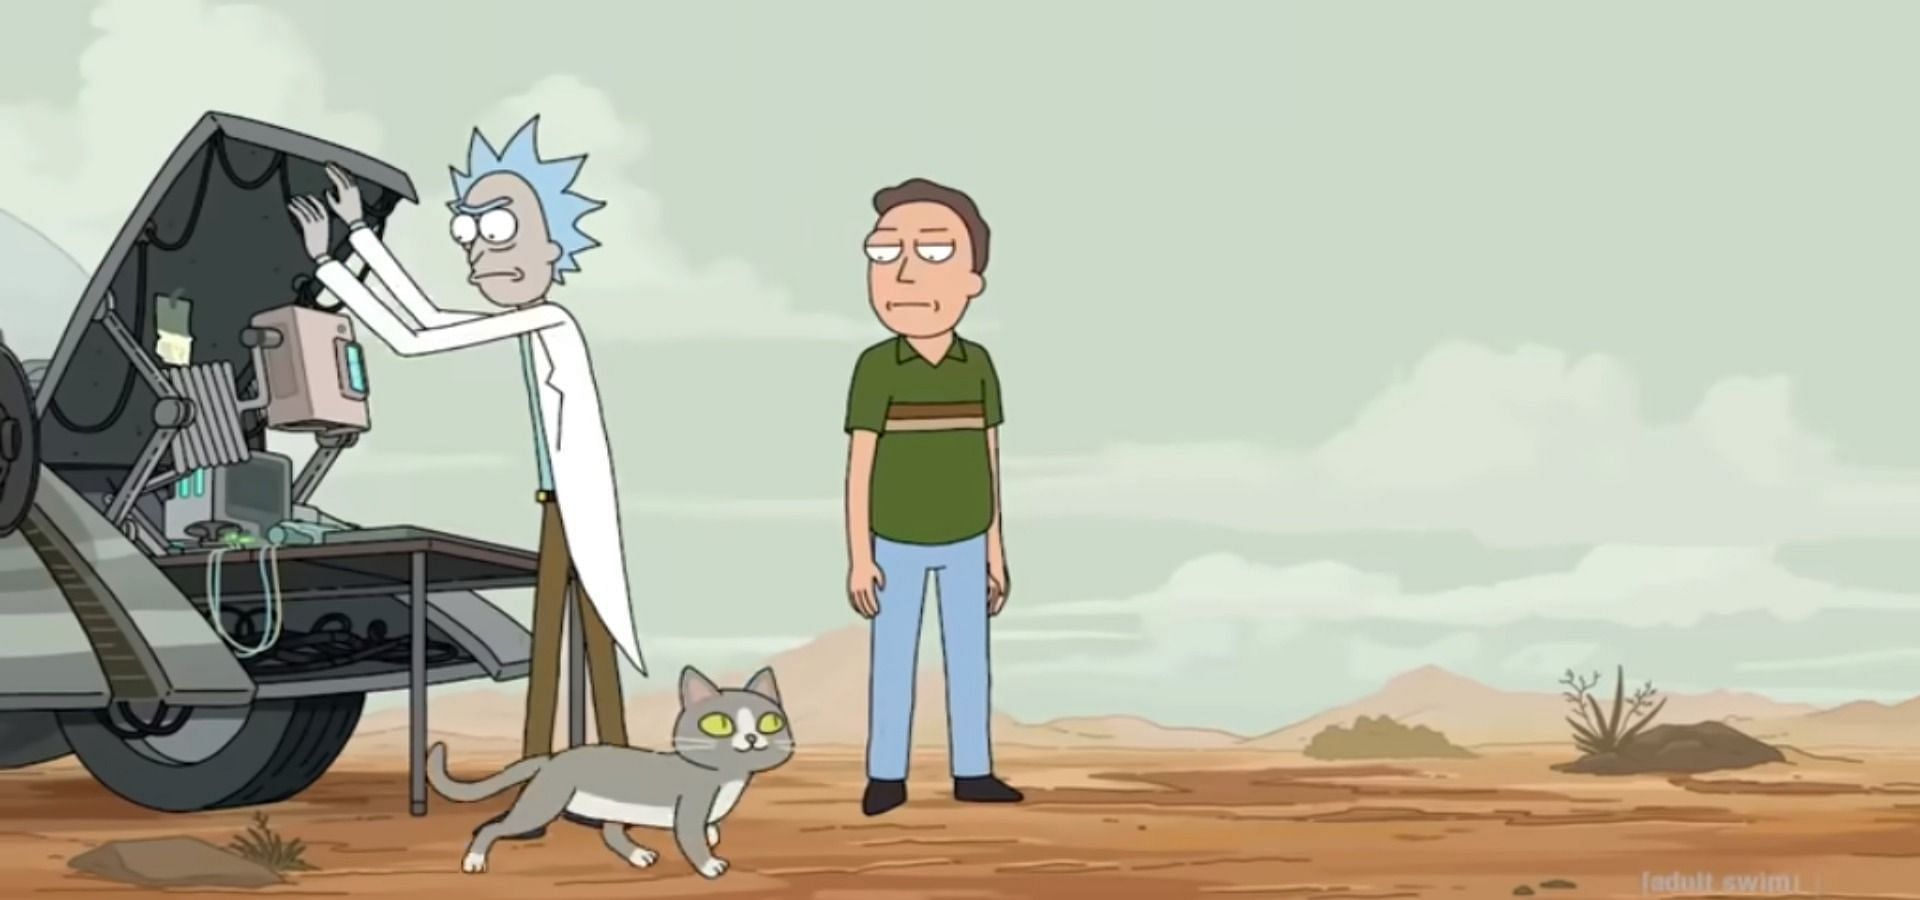 The cat can talk (Image via AdultSwim@YouTube)